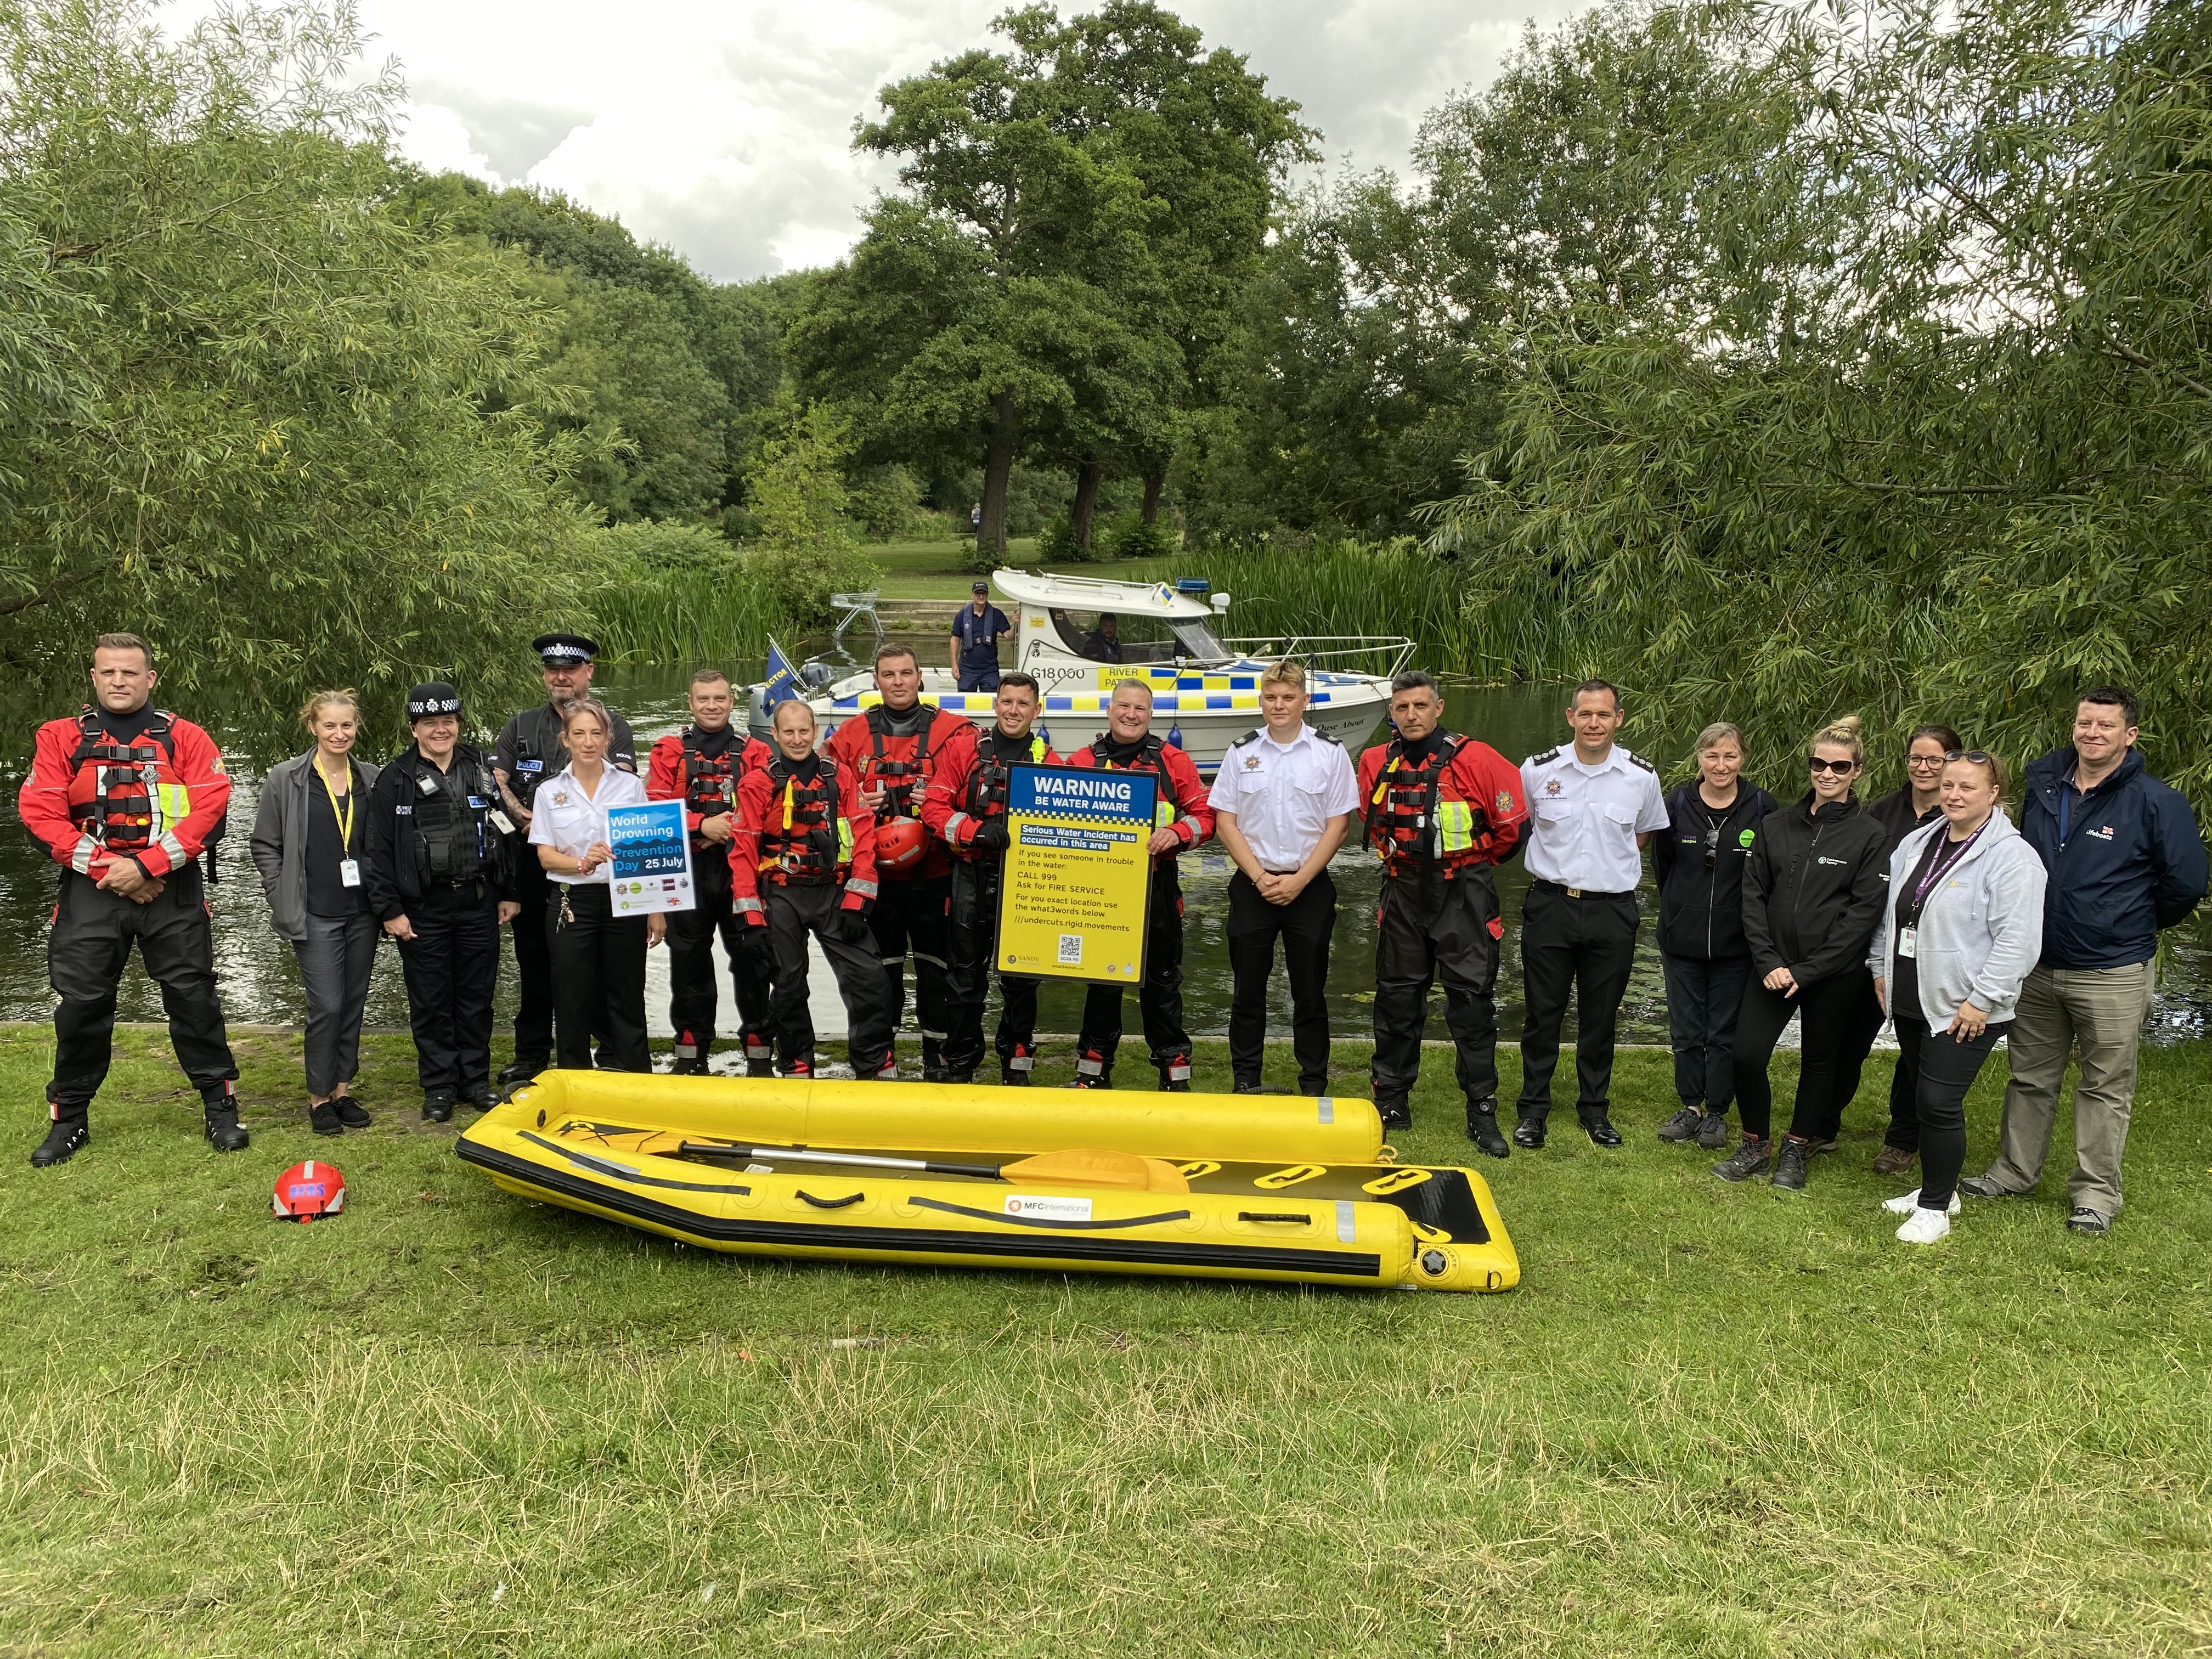 Bedfordshire Fire and Rescue Service personnel alongside agency colleagues holding up new water safety signage 